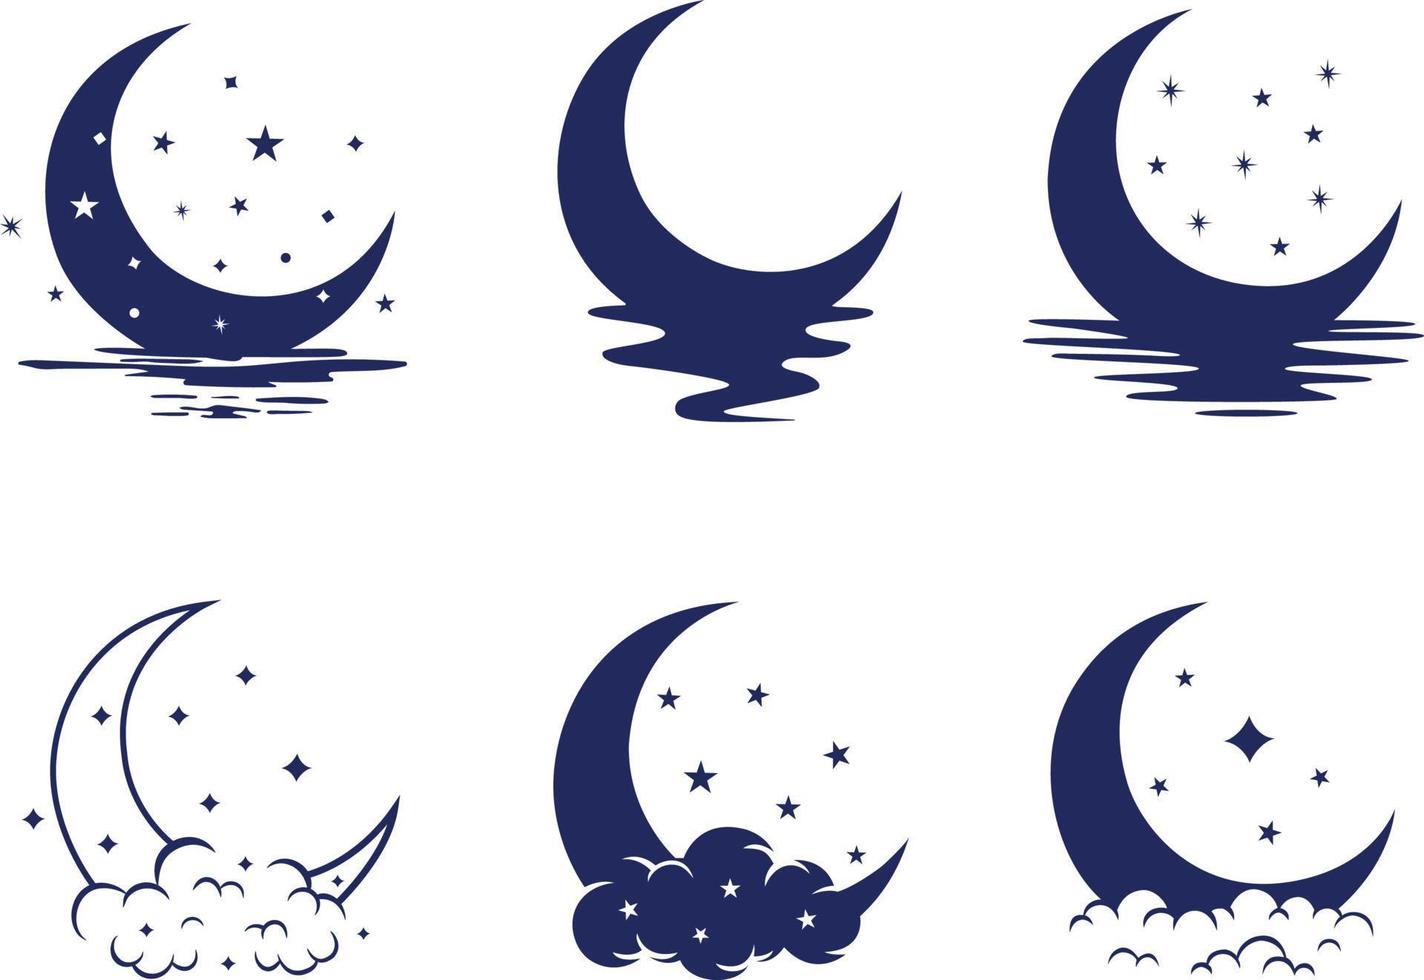 moon icon set in black and white flat style vector illustration isolated on white